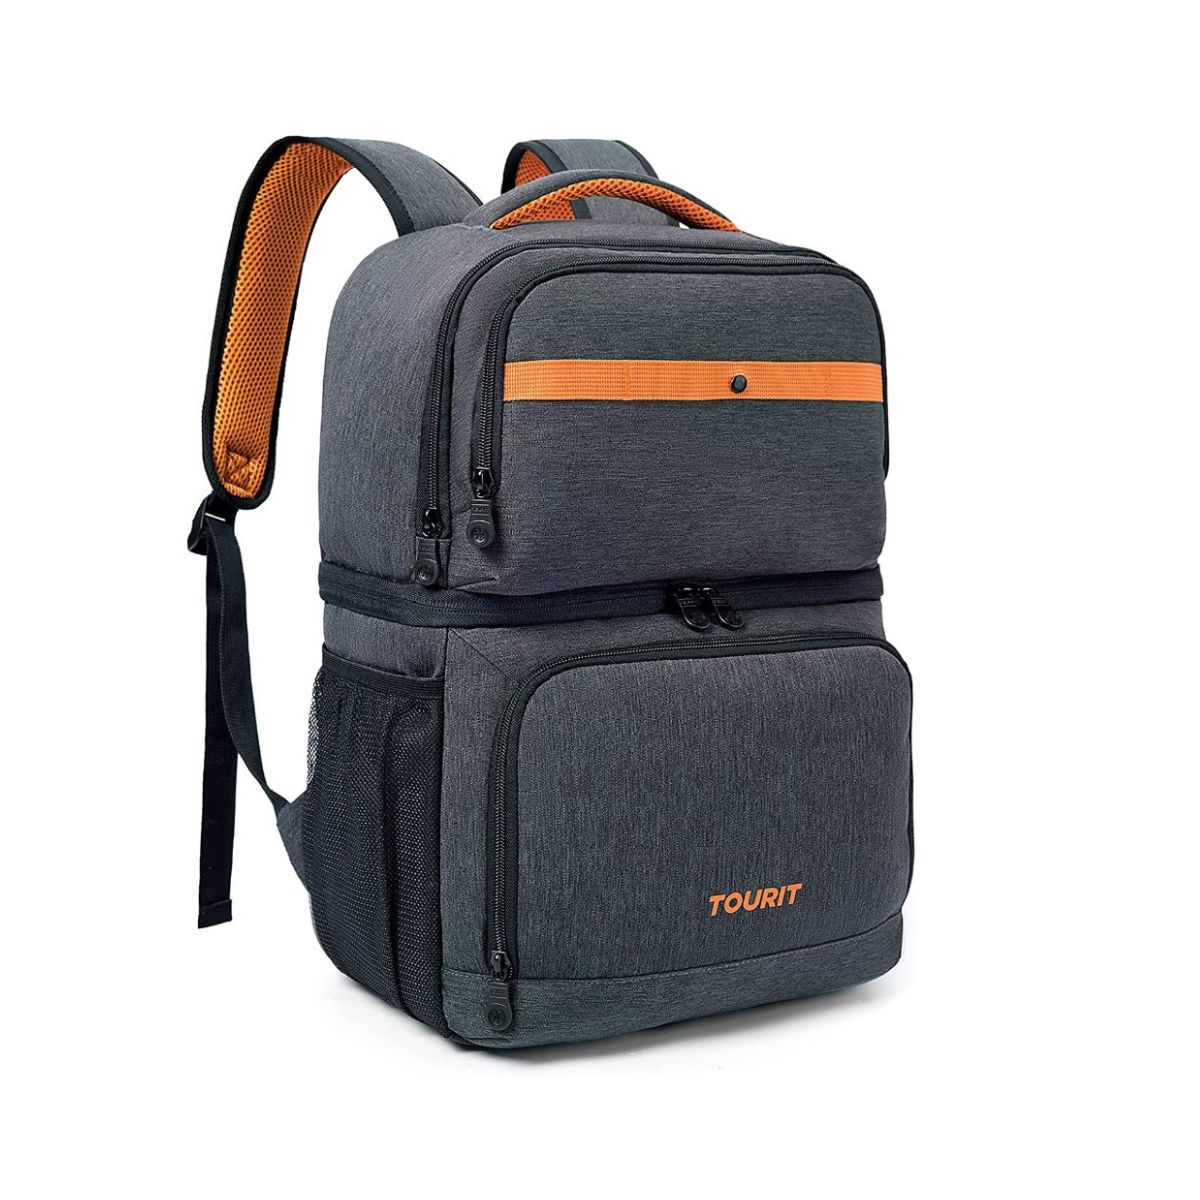 Grey backpack lunch box with orange trim and black zippers.